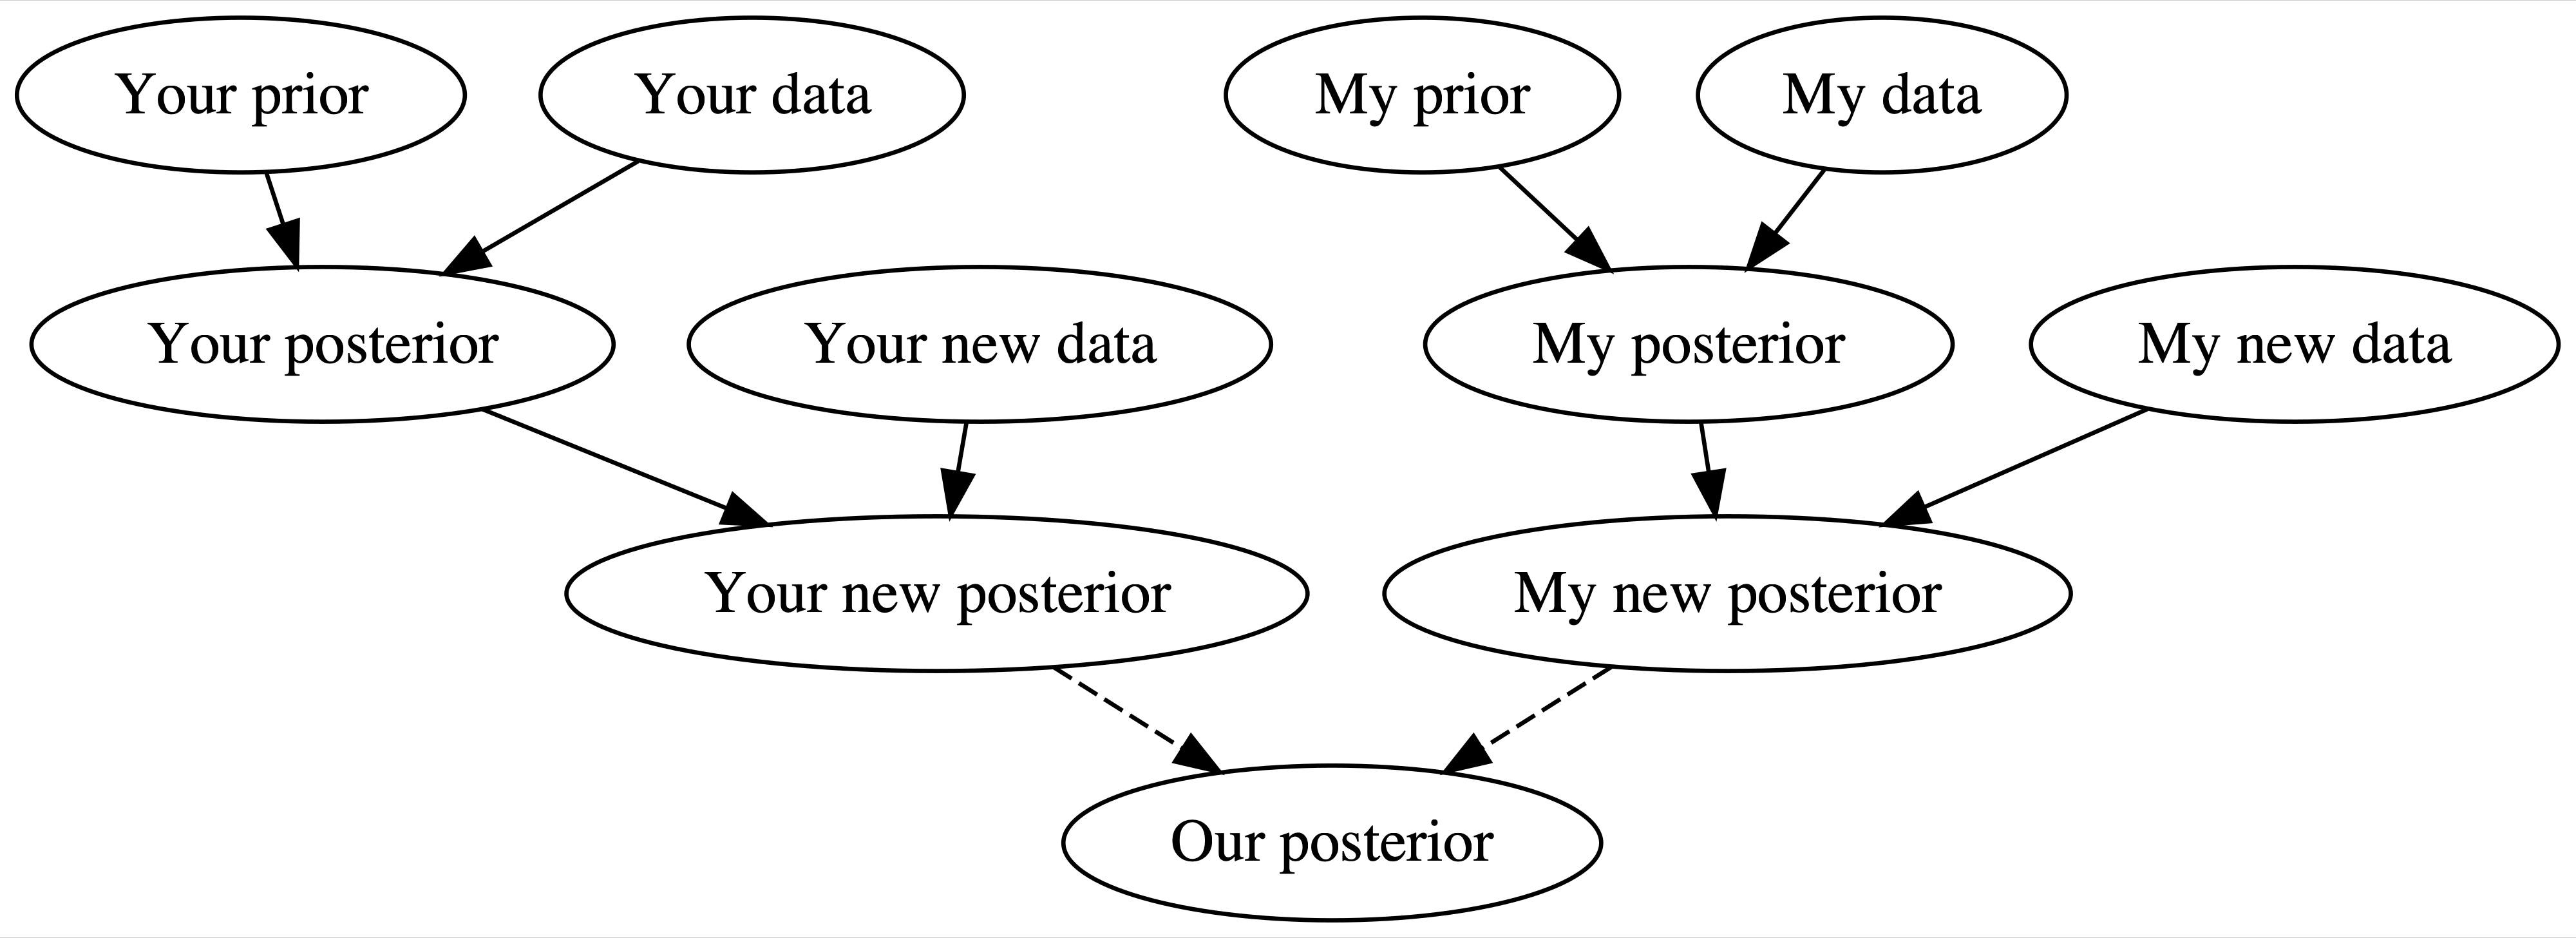 A flow chart of how two people's Bayesian analyses eventually come together in a shared posterior understanding. There are ellipses labeled as your prior, your data, your posterior, your new data, my prior, my data, my posterior, my new posterior. The final ellipse of the flow chart is labeled as our posterior.